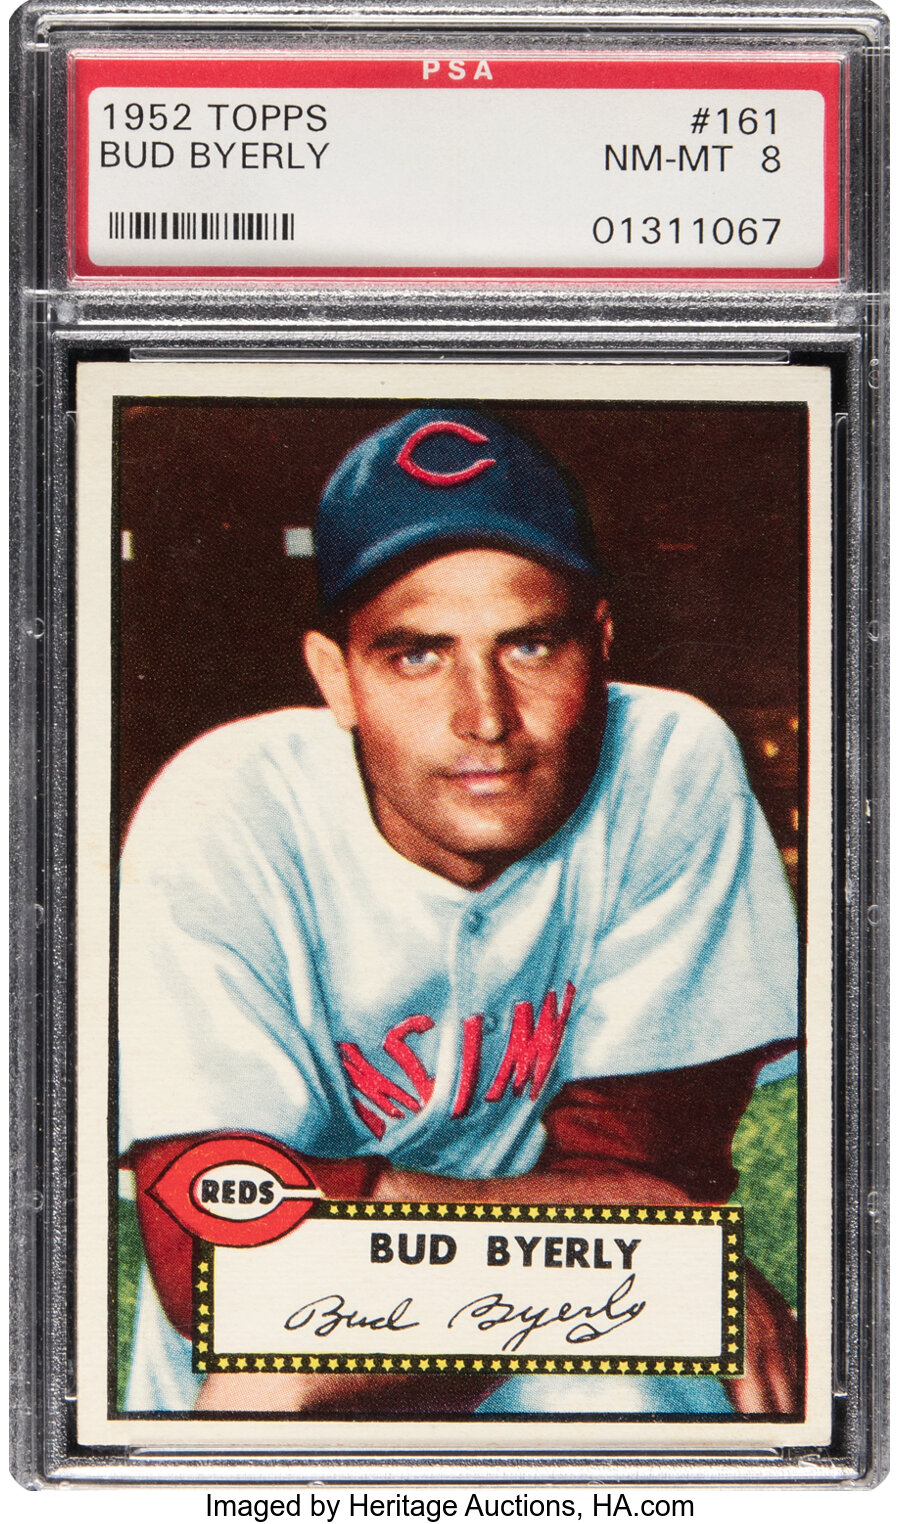 1952 Topps Bud Byerly Rookie #161 PSA NM-MT 8 - Only One Higher!